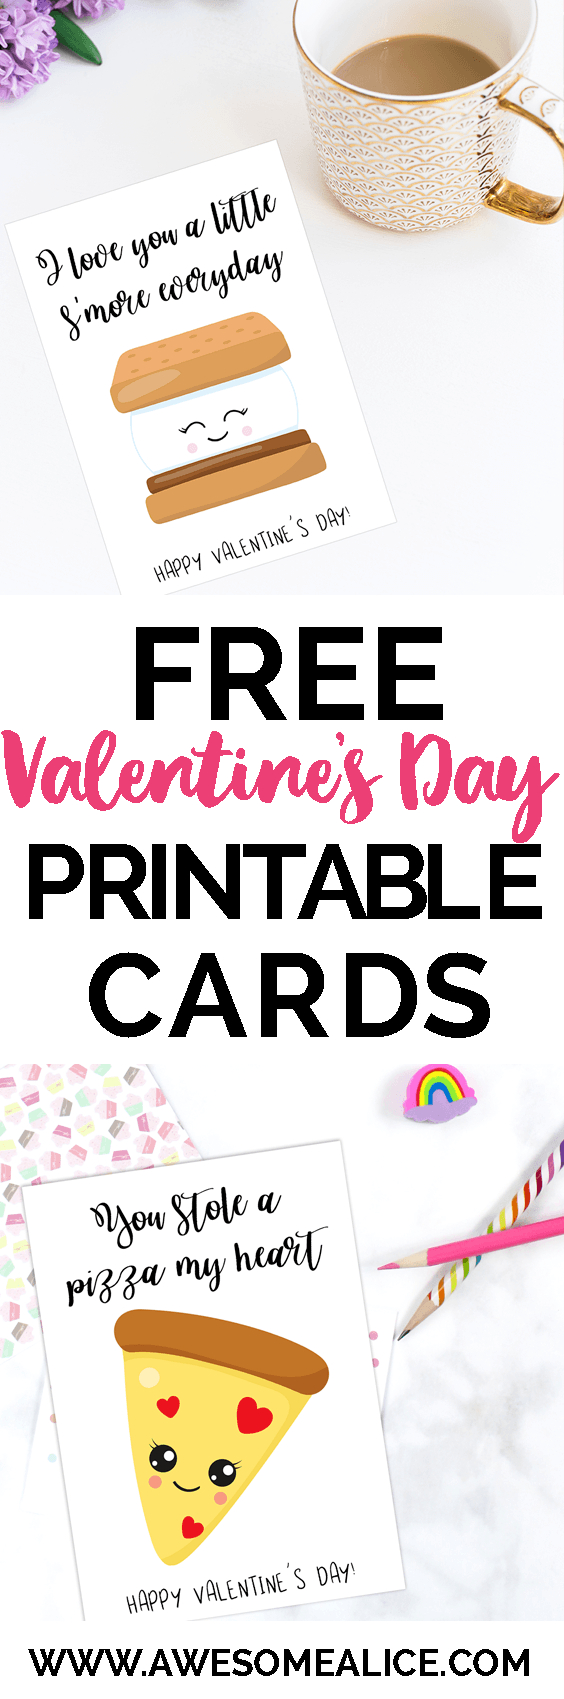 Free Printable Funny Valentine&amp;#039;s Cards | Awesome Alice - Free Funny Printable Cards